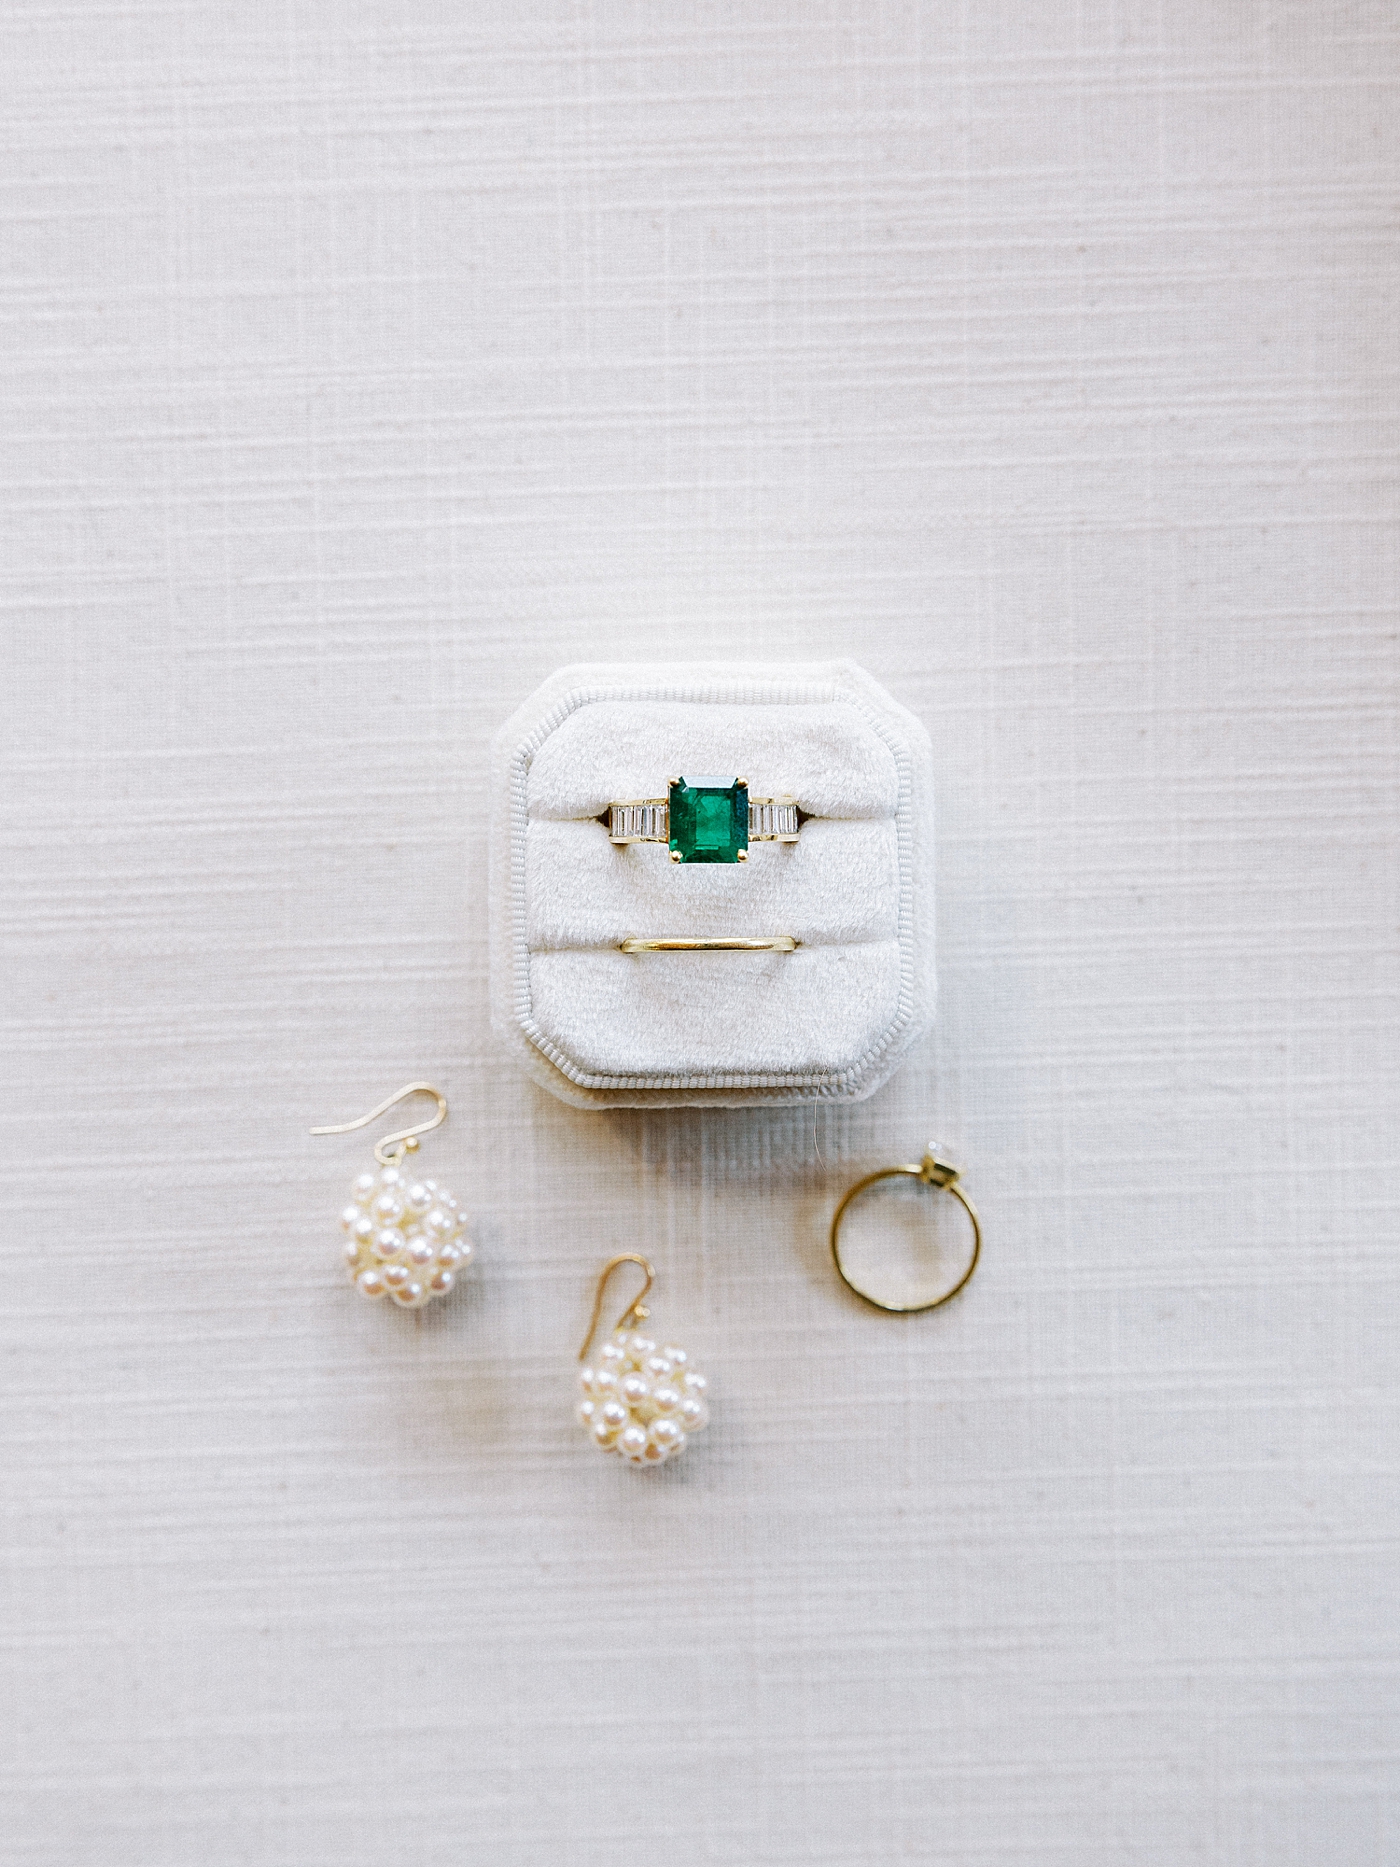 Bride's emerald ring in a gray ring box | Photo by Diane Sotero Photography